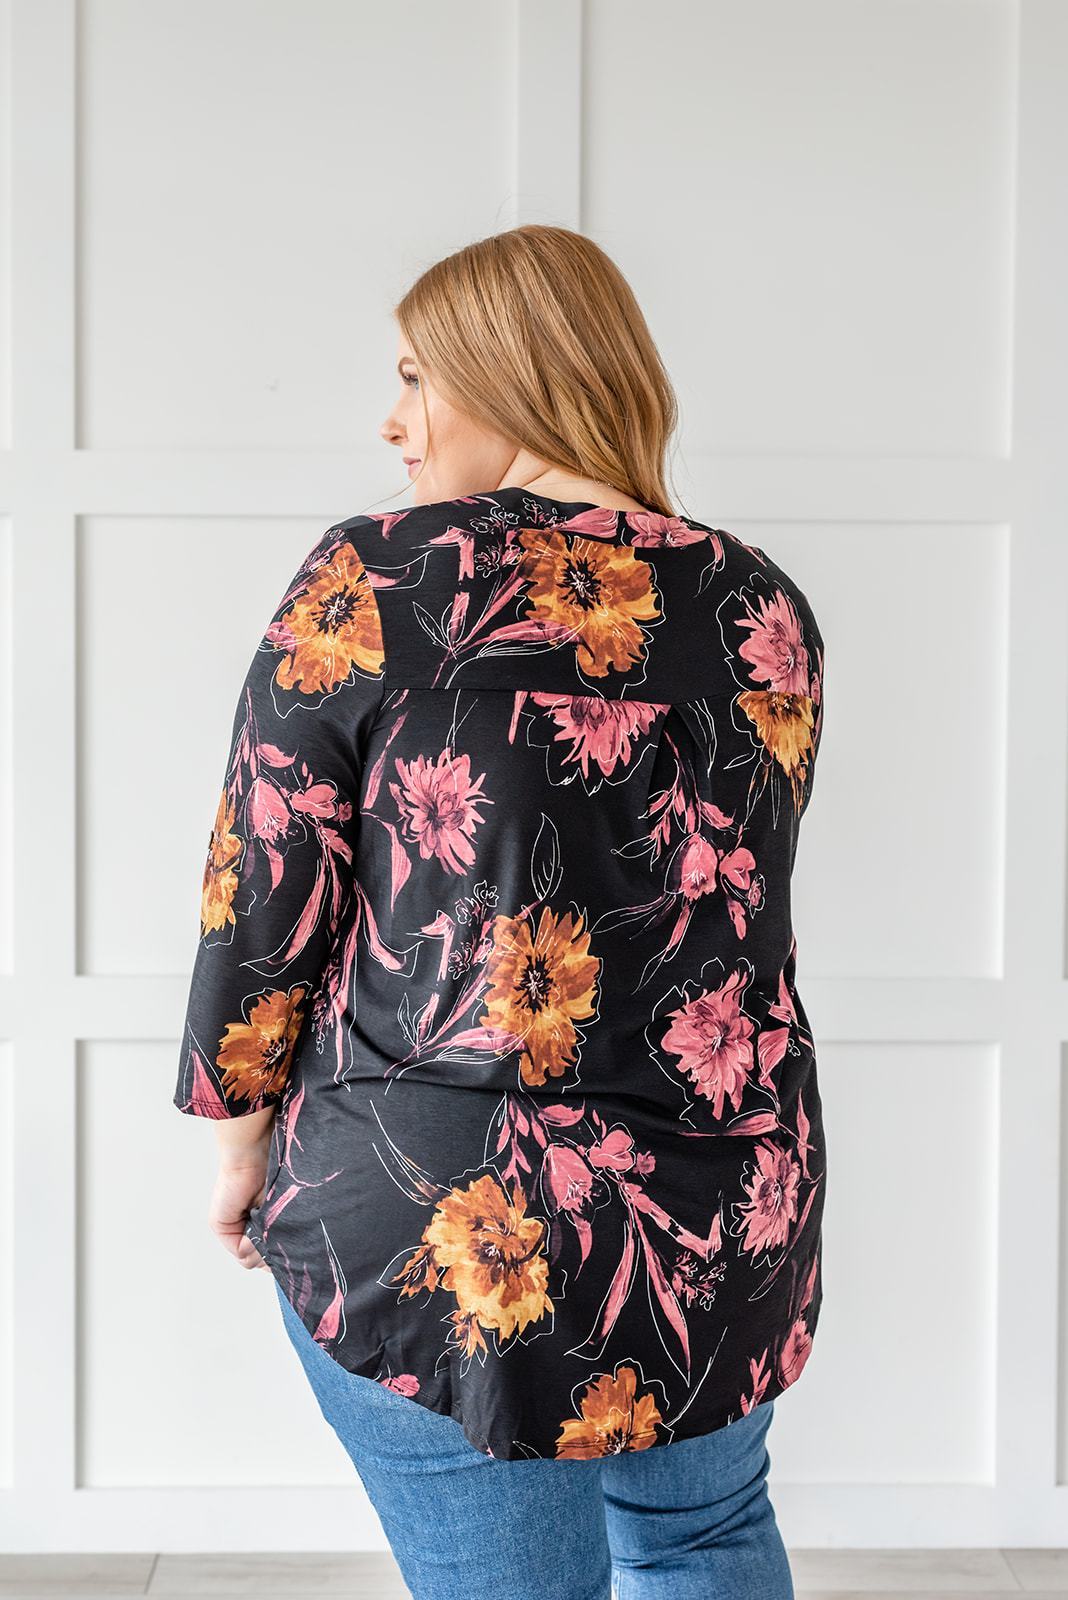 Lift My Spirits Floral Top - LOLA LUXE